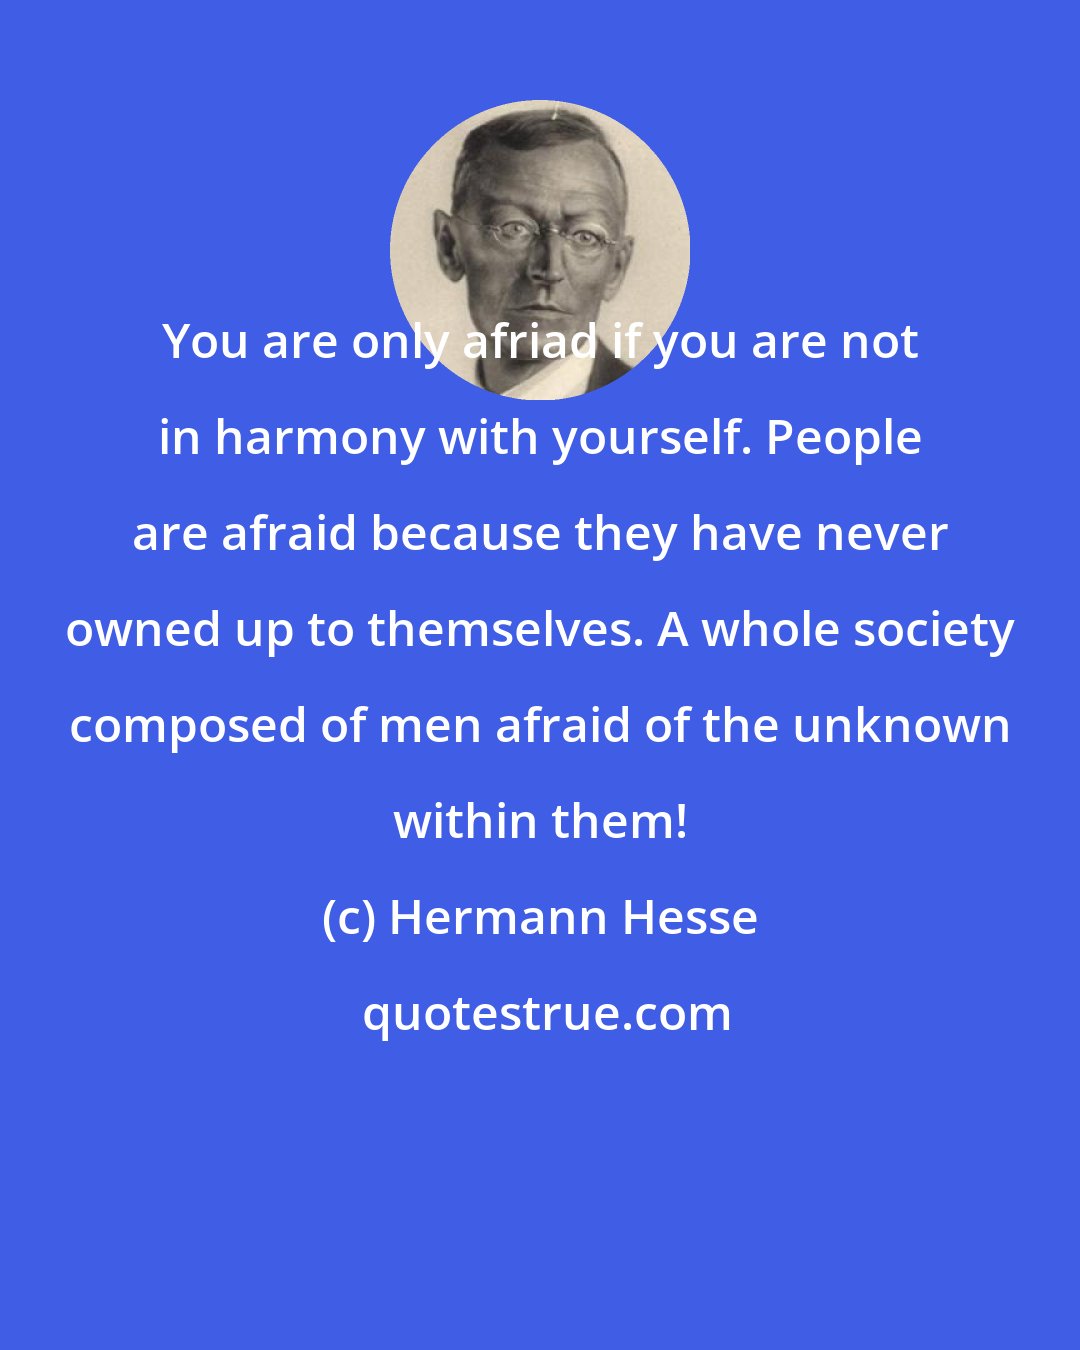 Hermann Hesse: You are only afriad if you are not in harmony with yourself. People are afraid because they have never owned up to themselves. A whole society composed of men afraid of the unknown within them!